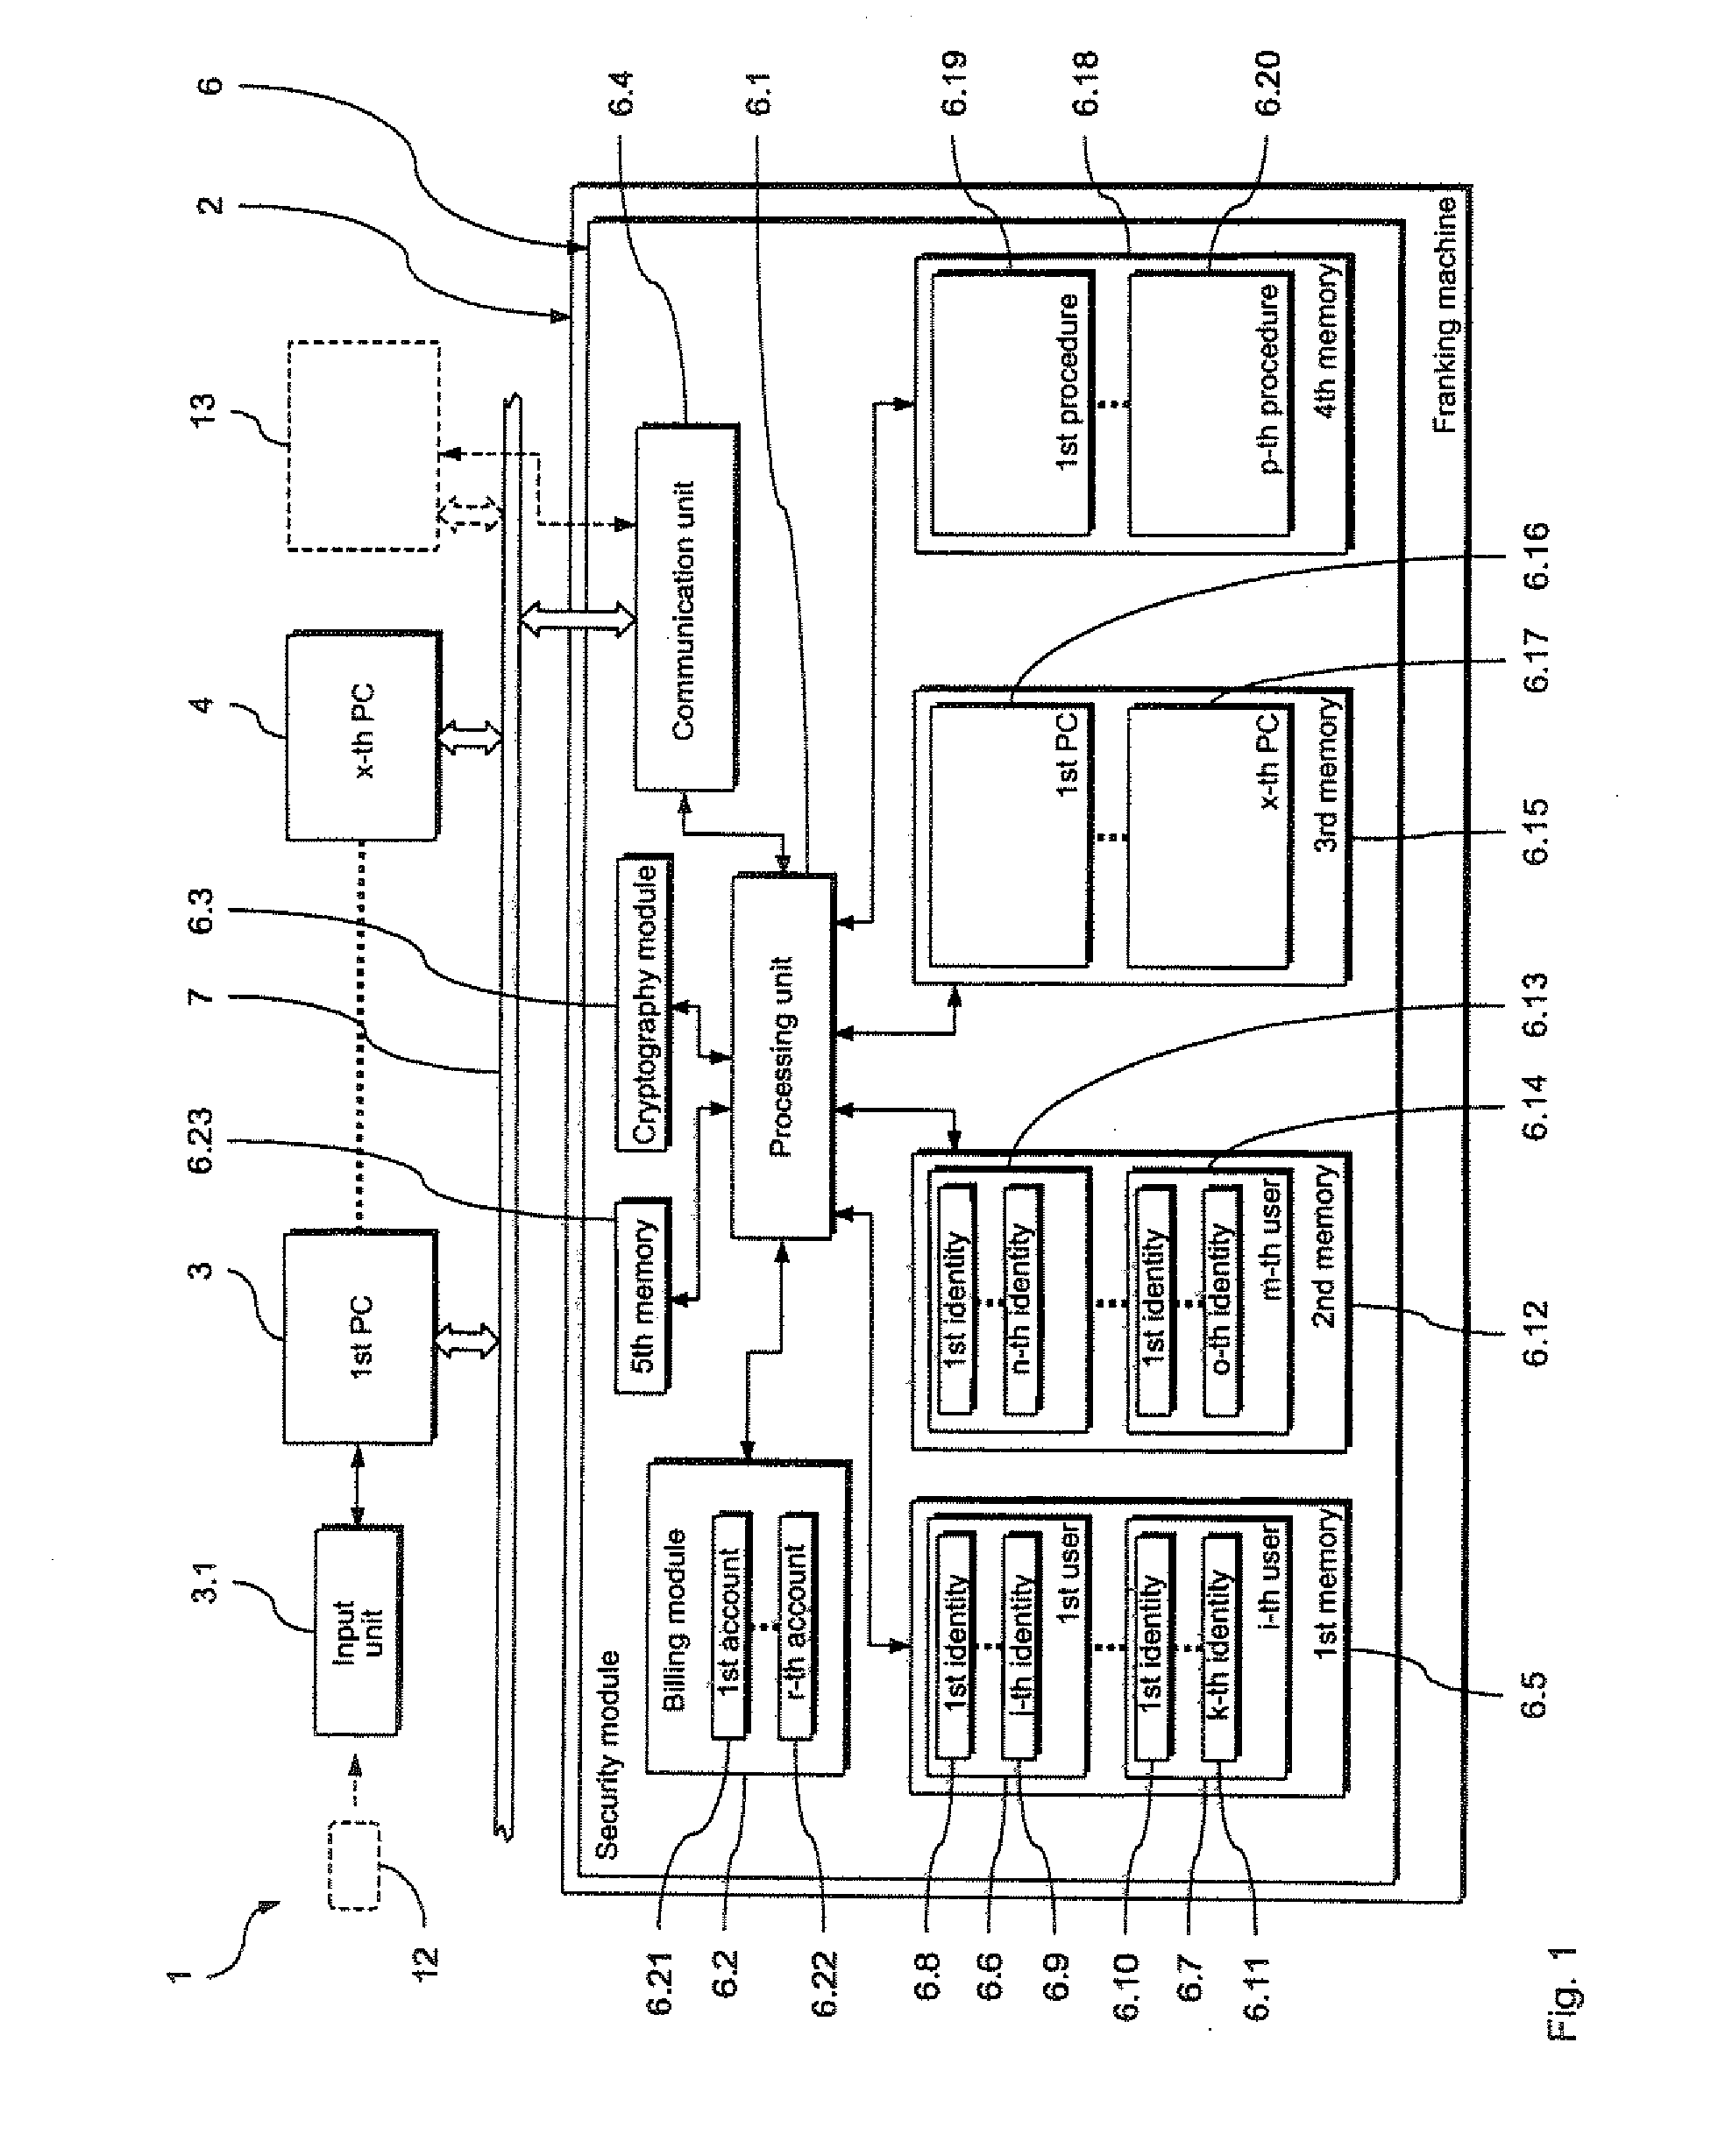 Method and arrangement for provision of security relevant services via a security module of a franking machine